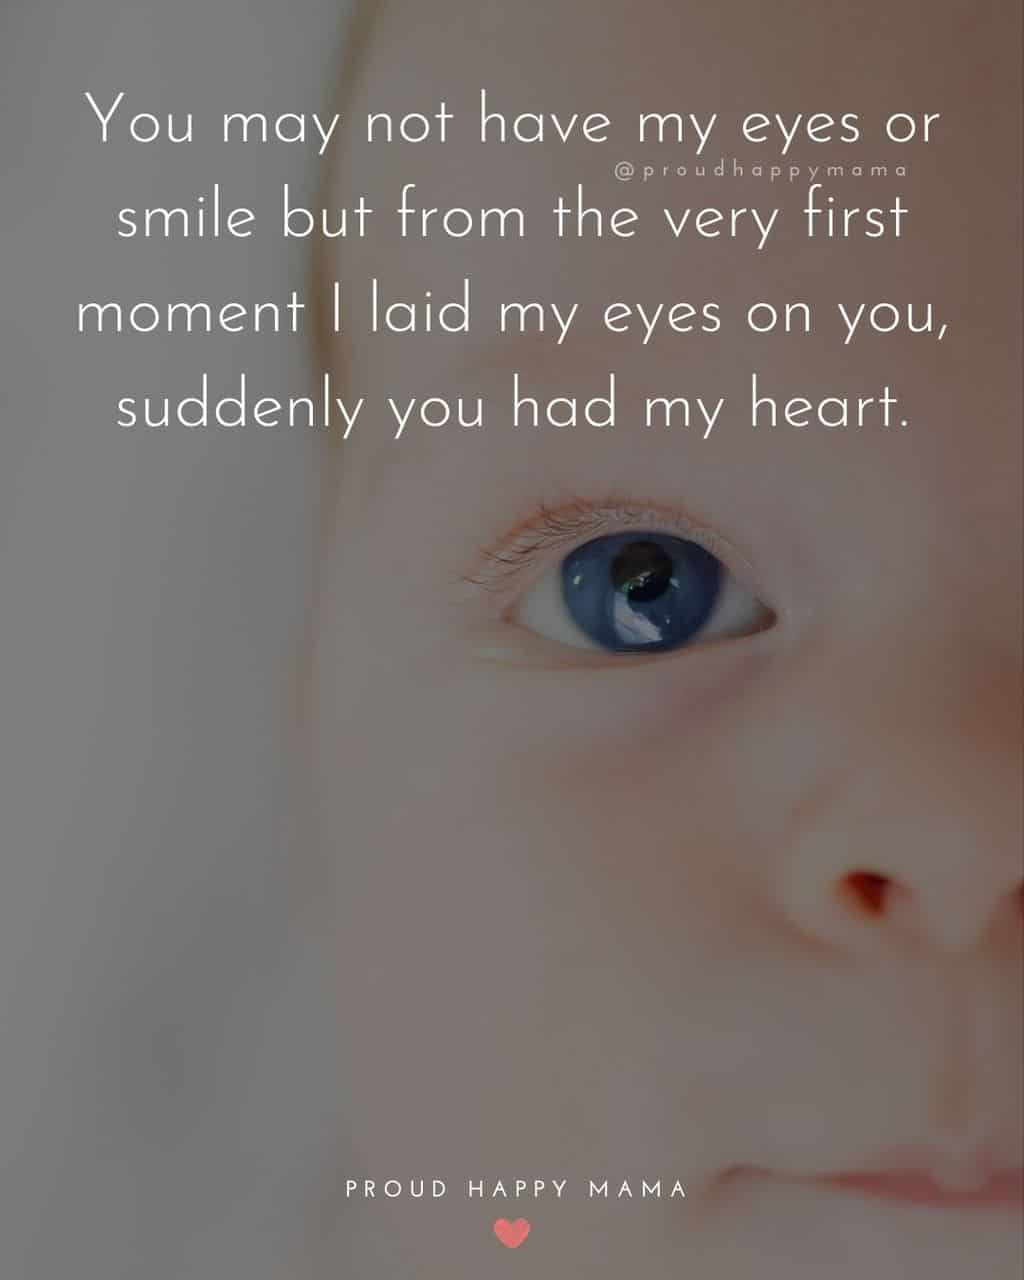 Niece Quotes - You may not have my eyes or smile but from the very first moment I laid my eyes on you, suddenly you had my heart.